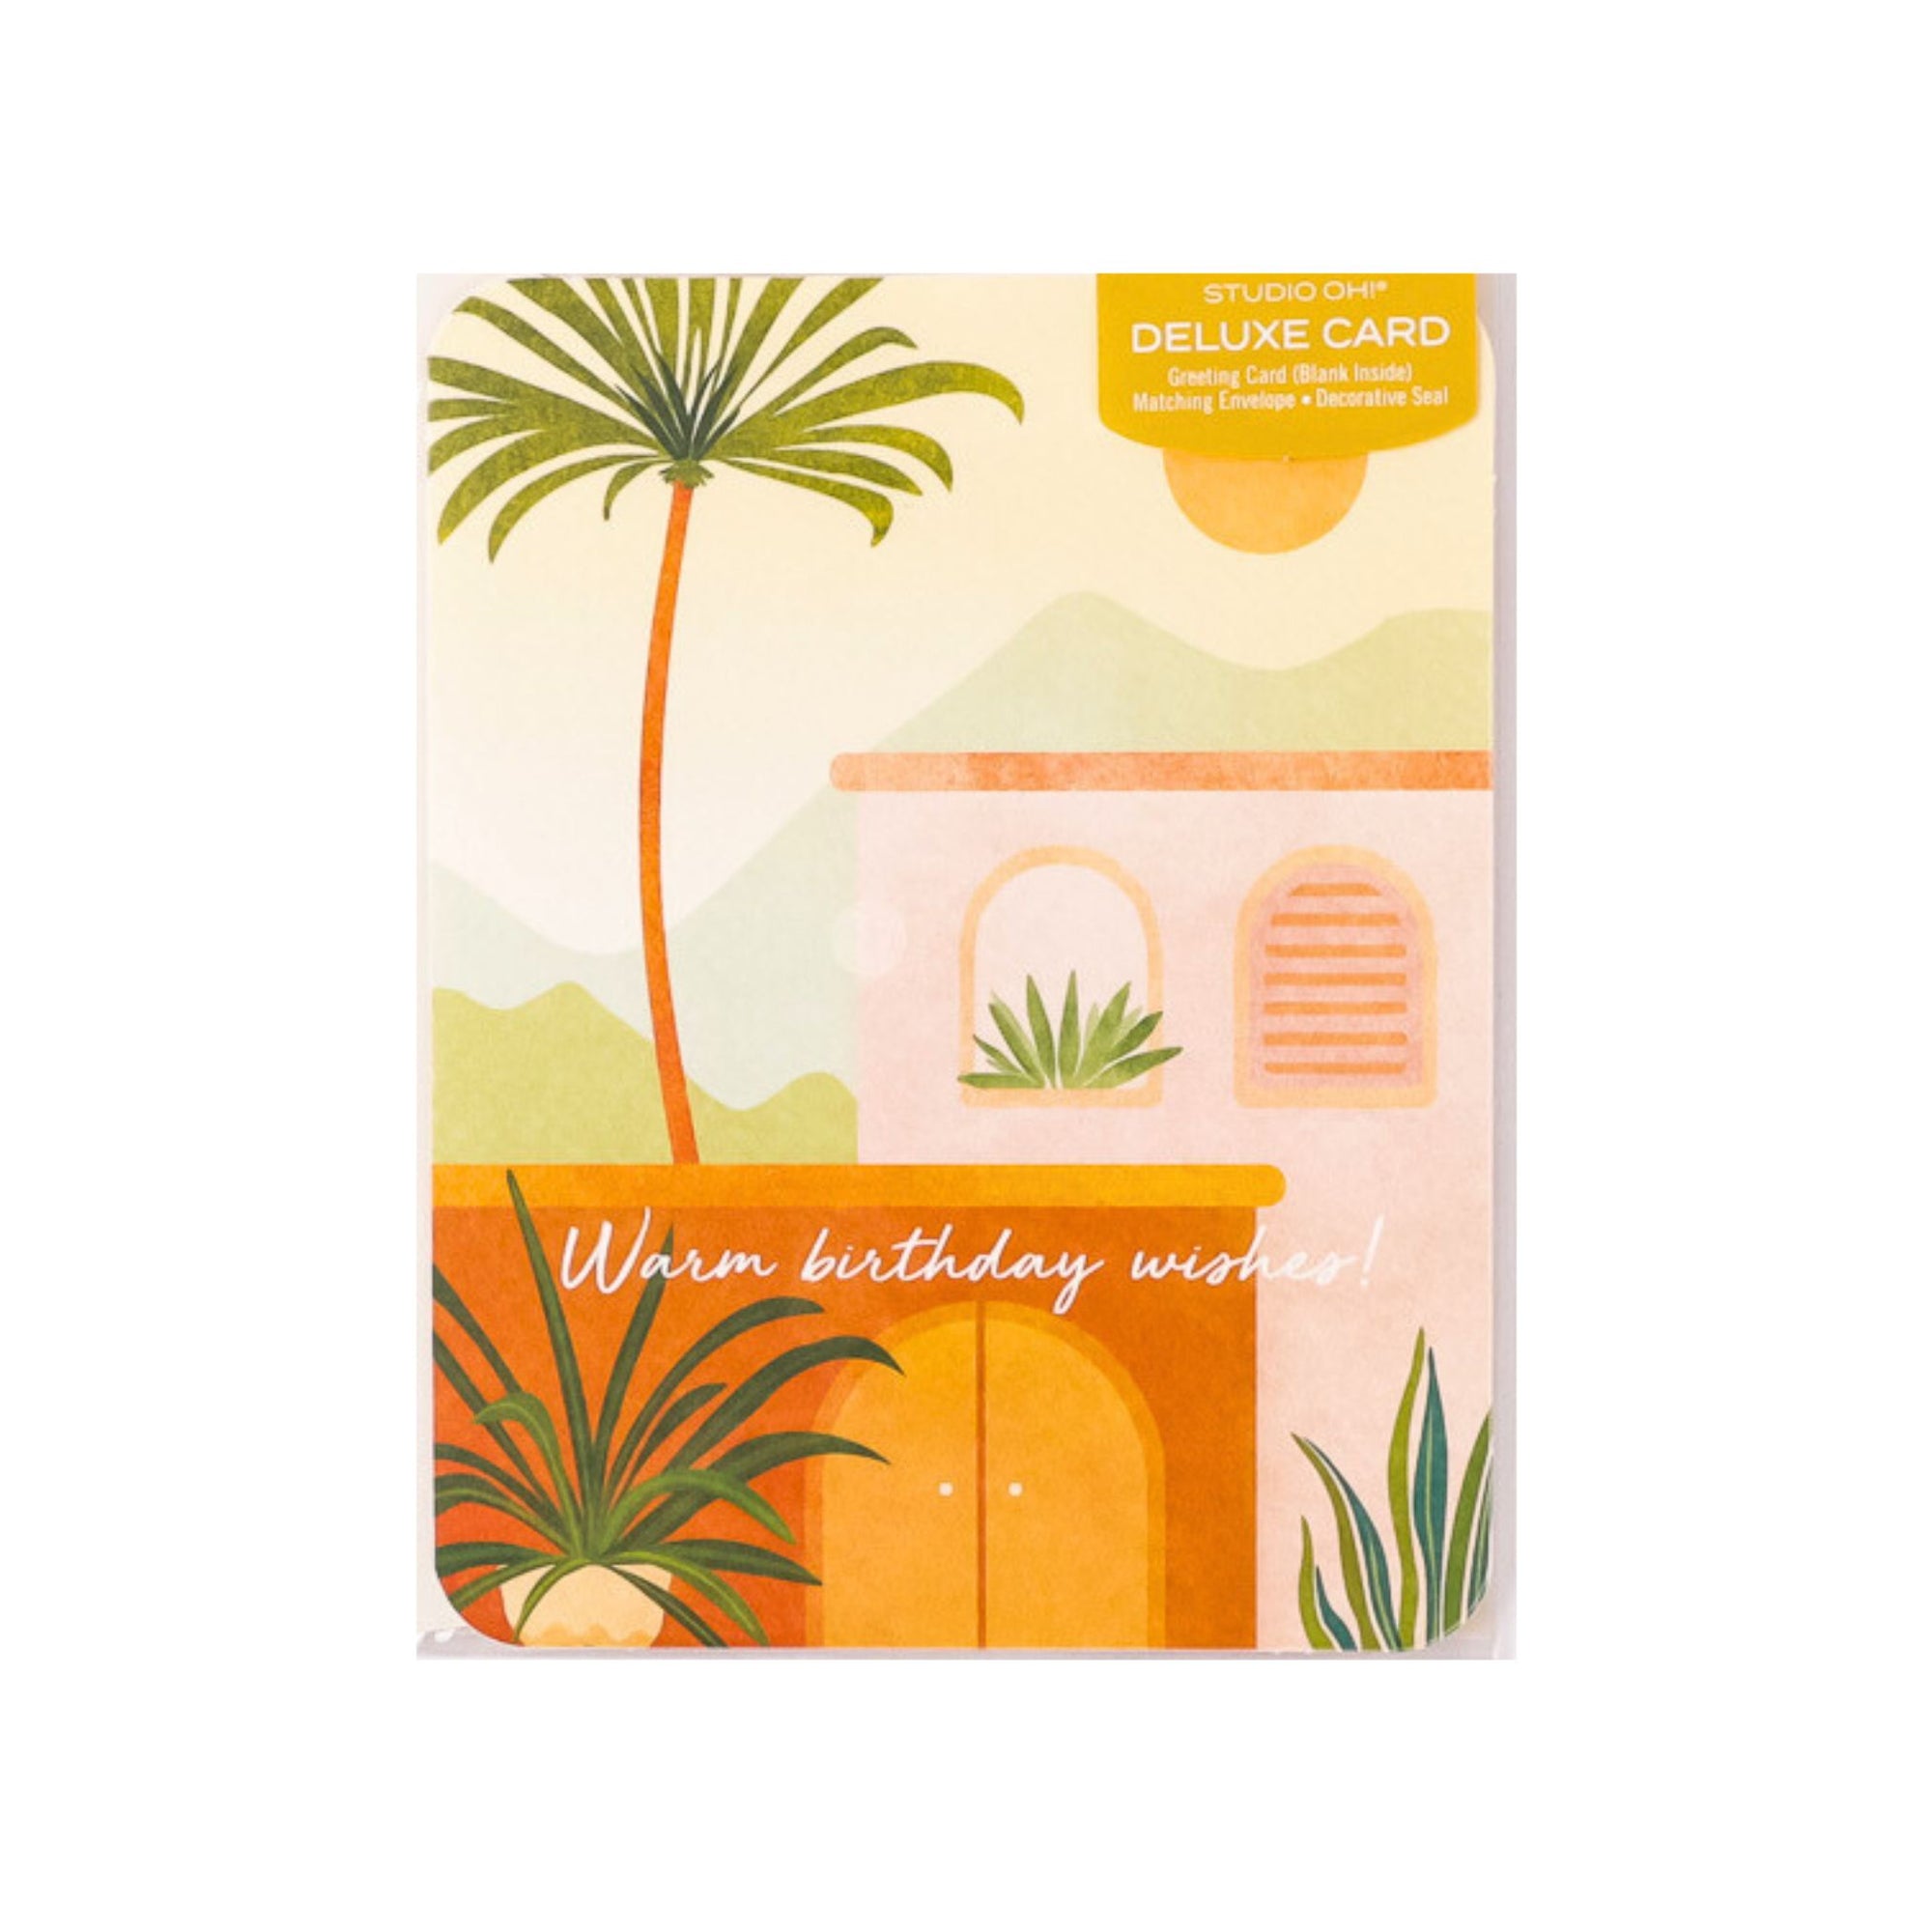 Deluxe Warm Birthday Wishes Card - Green Fresh Florals + Plants